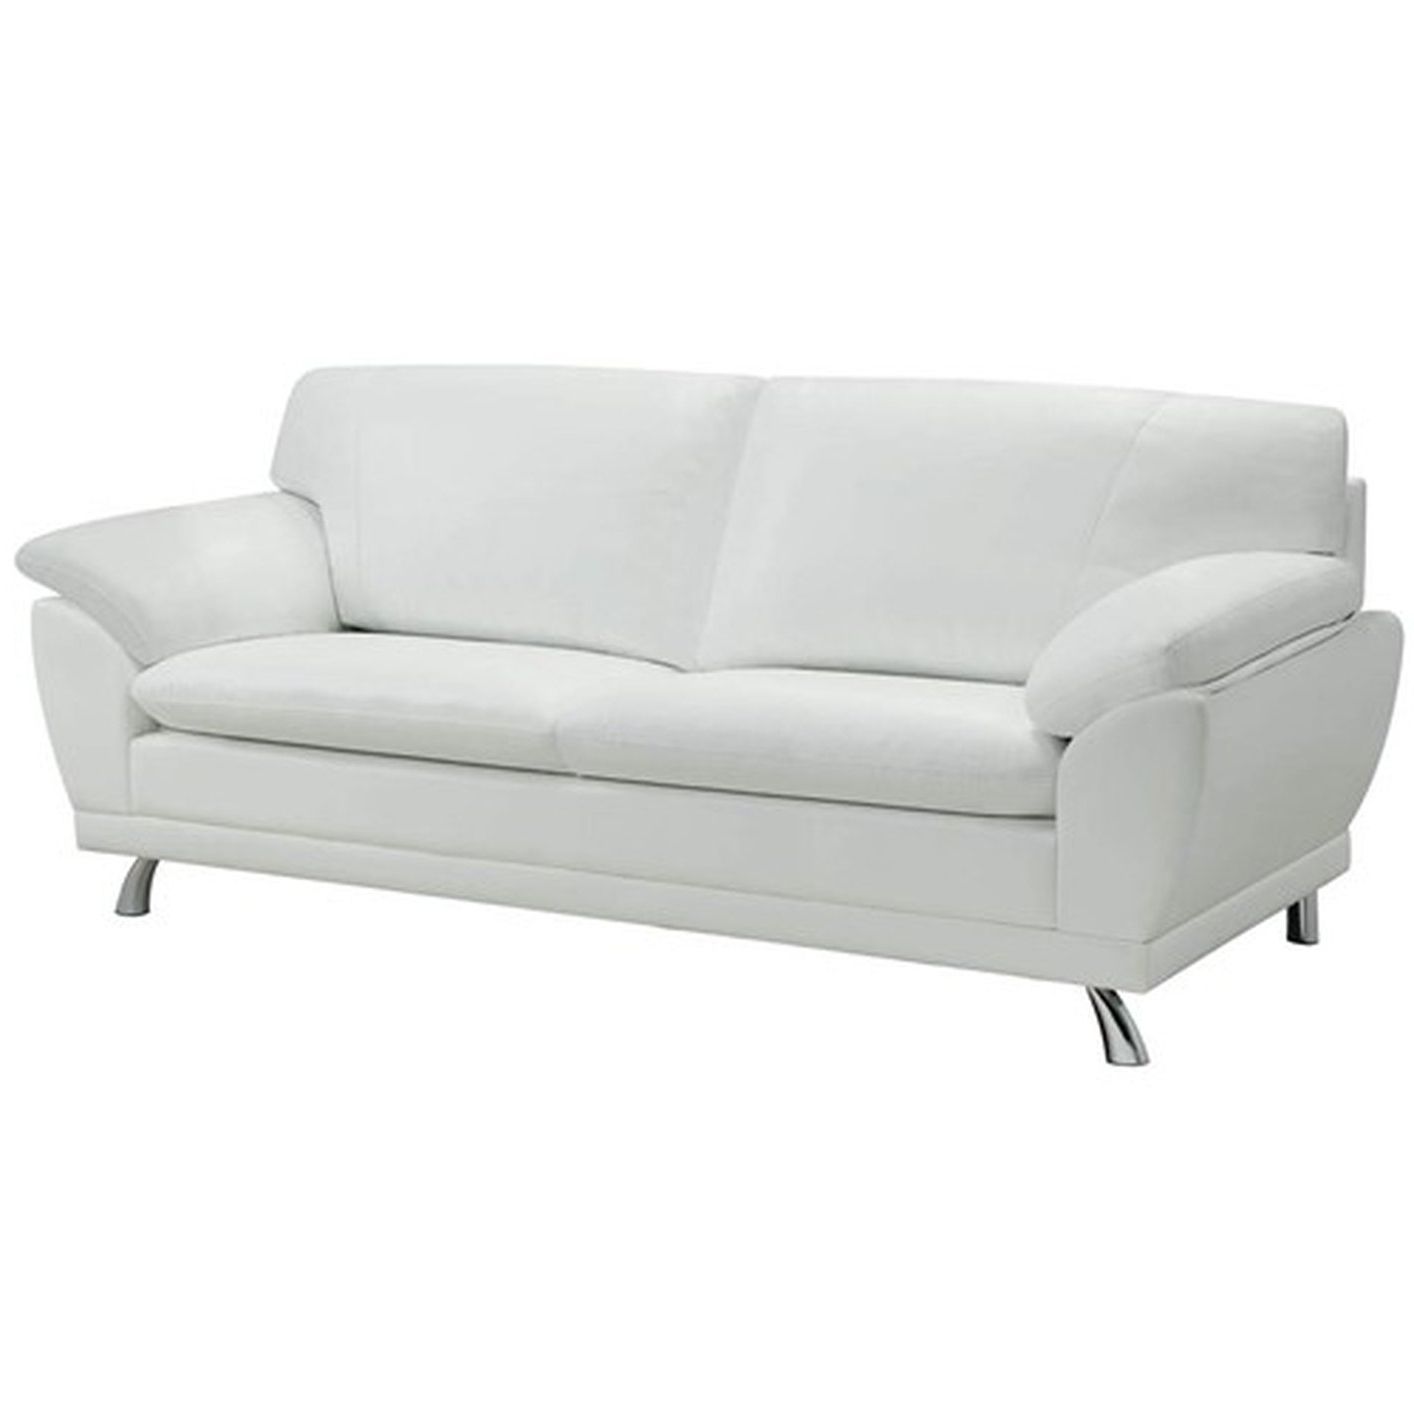 Amazing White Leather Couch 91 With Additional Sofas And Couches Pertaining To Well Known White Leather Sofas (View 14 of 15)